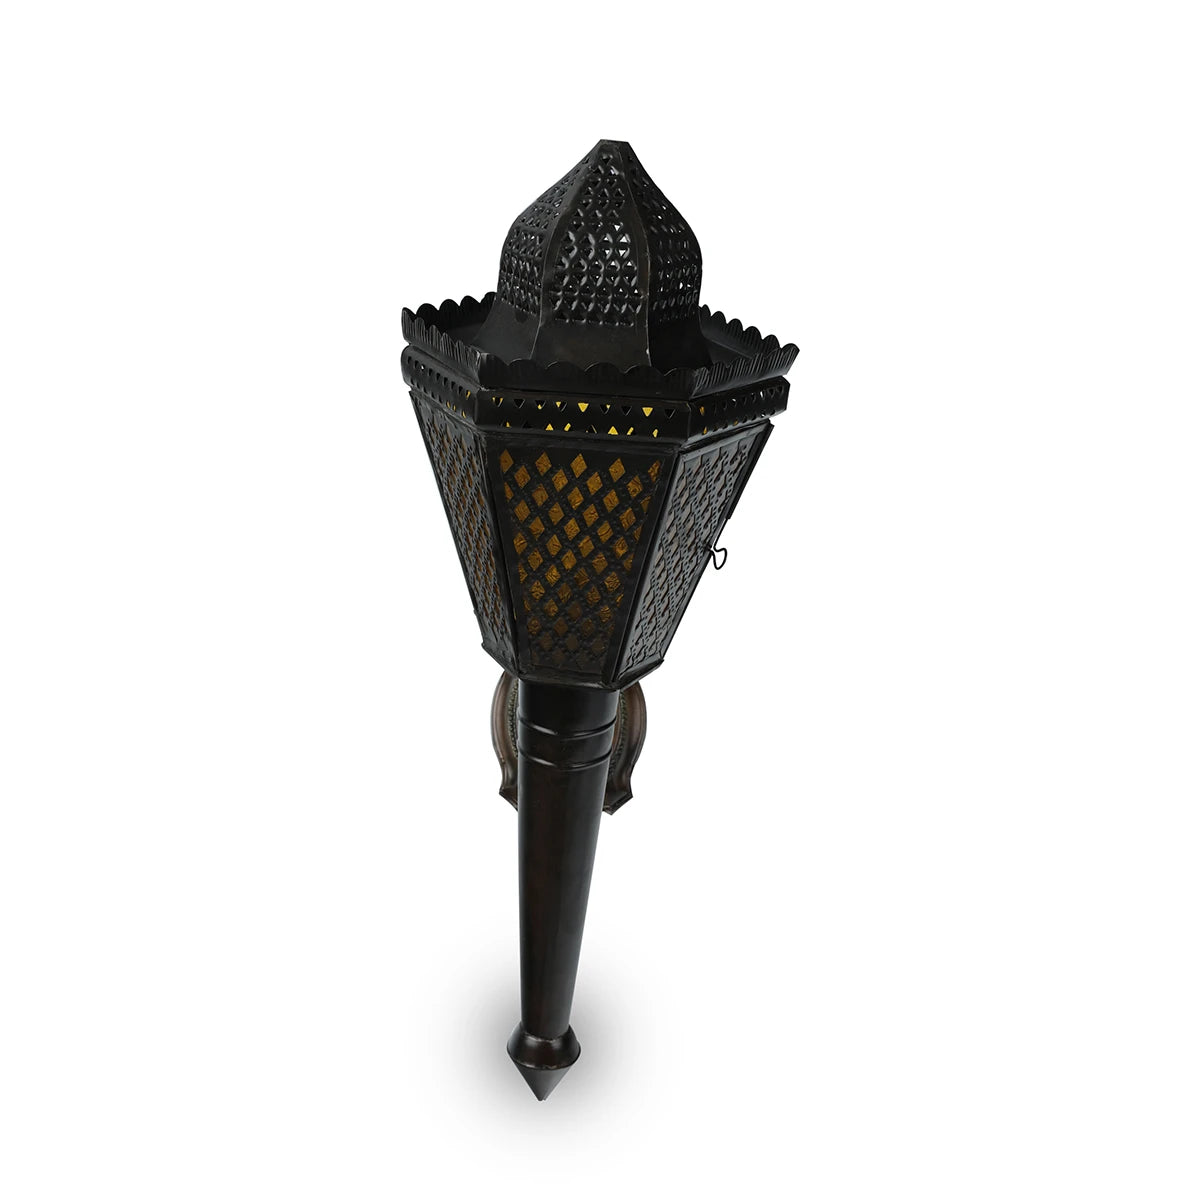 Front View of Arabian Indoor Wall Torch Lantern